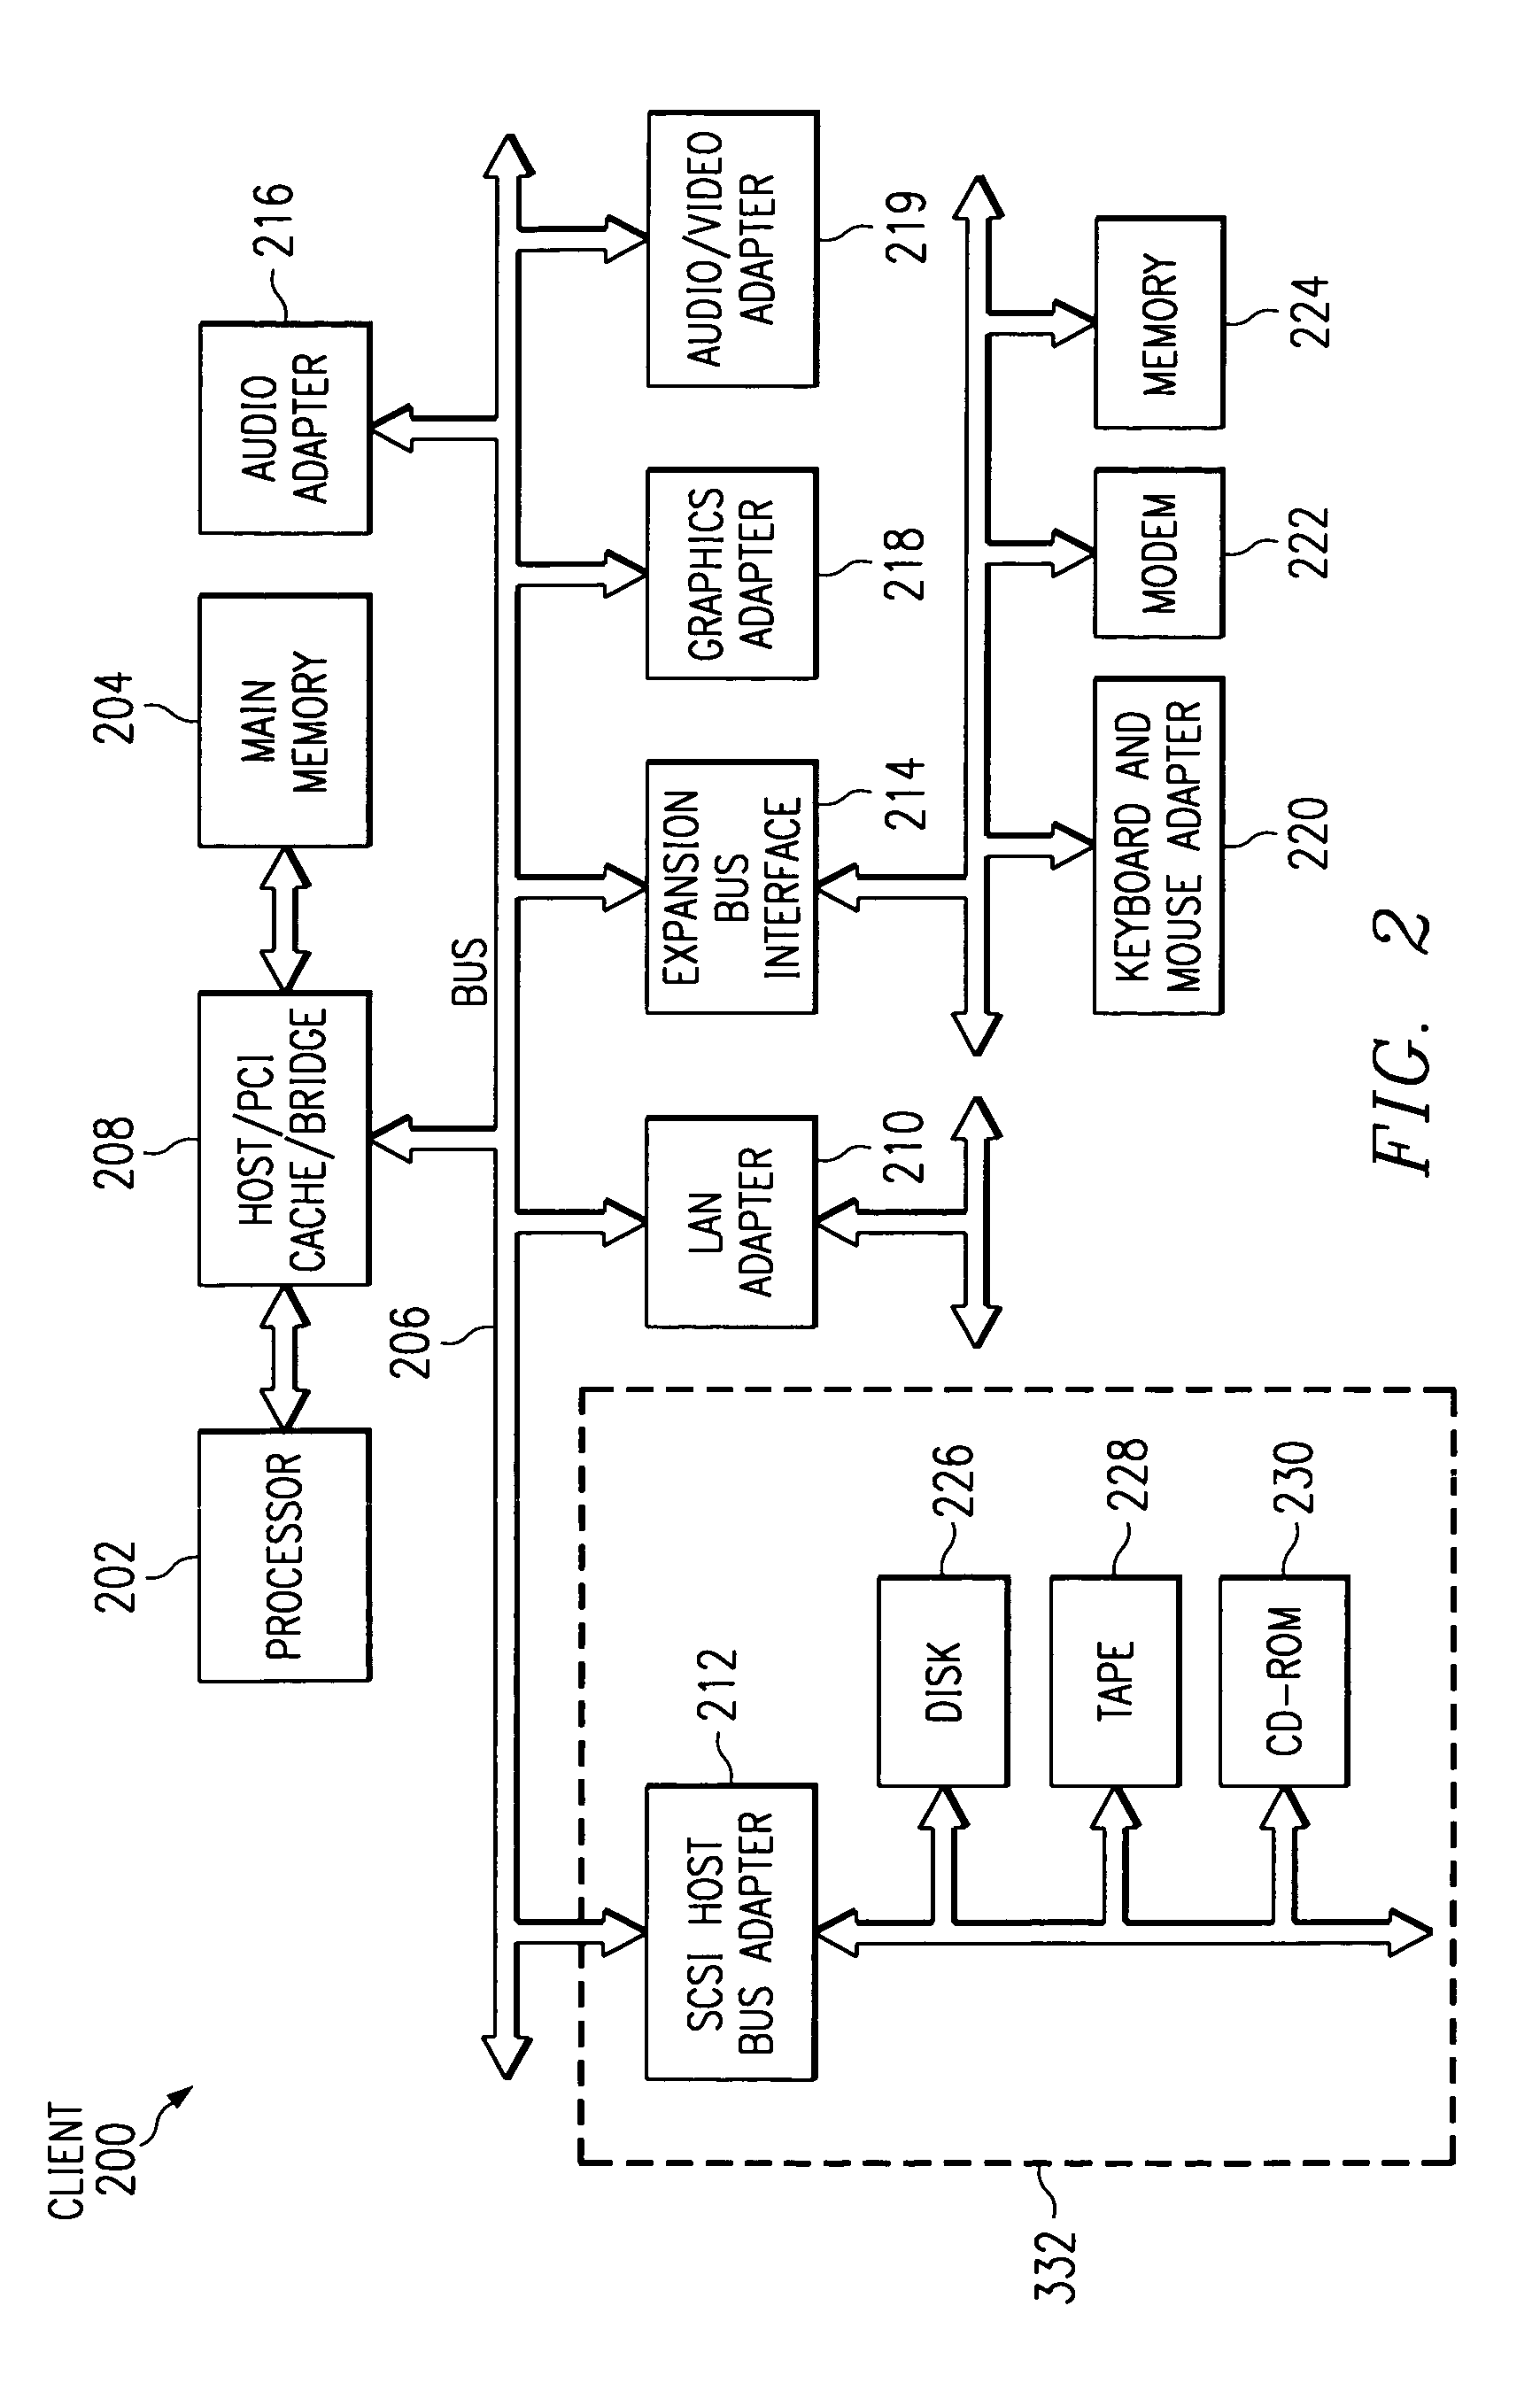 Method and system for incorporation of graphical print techniques in a web browser